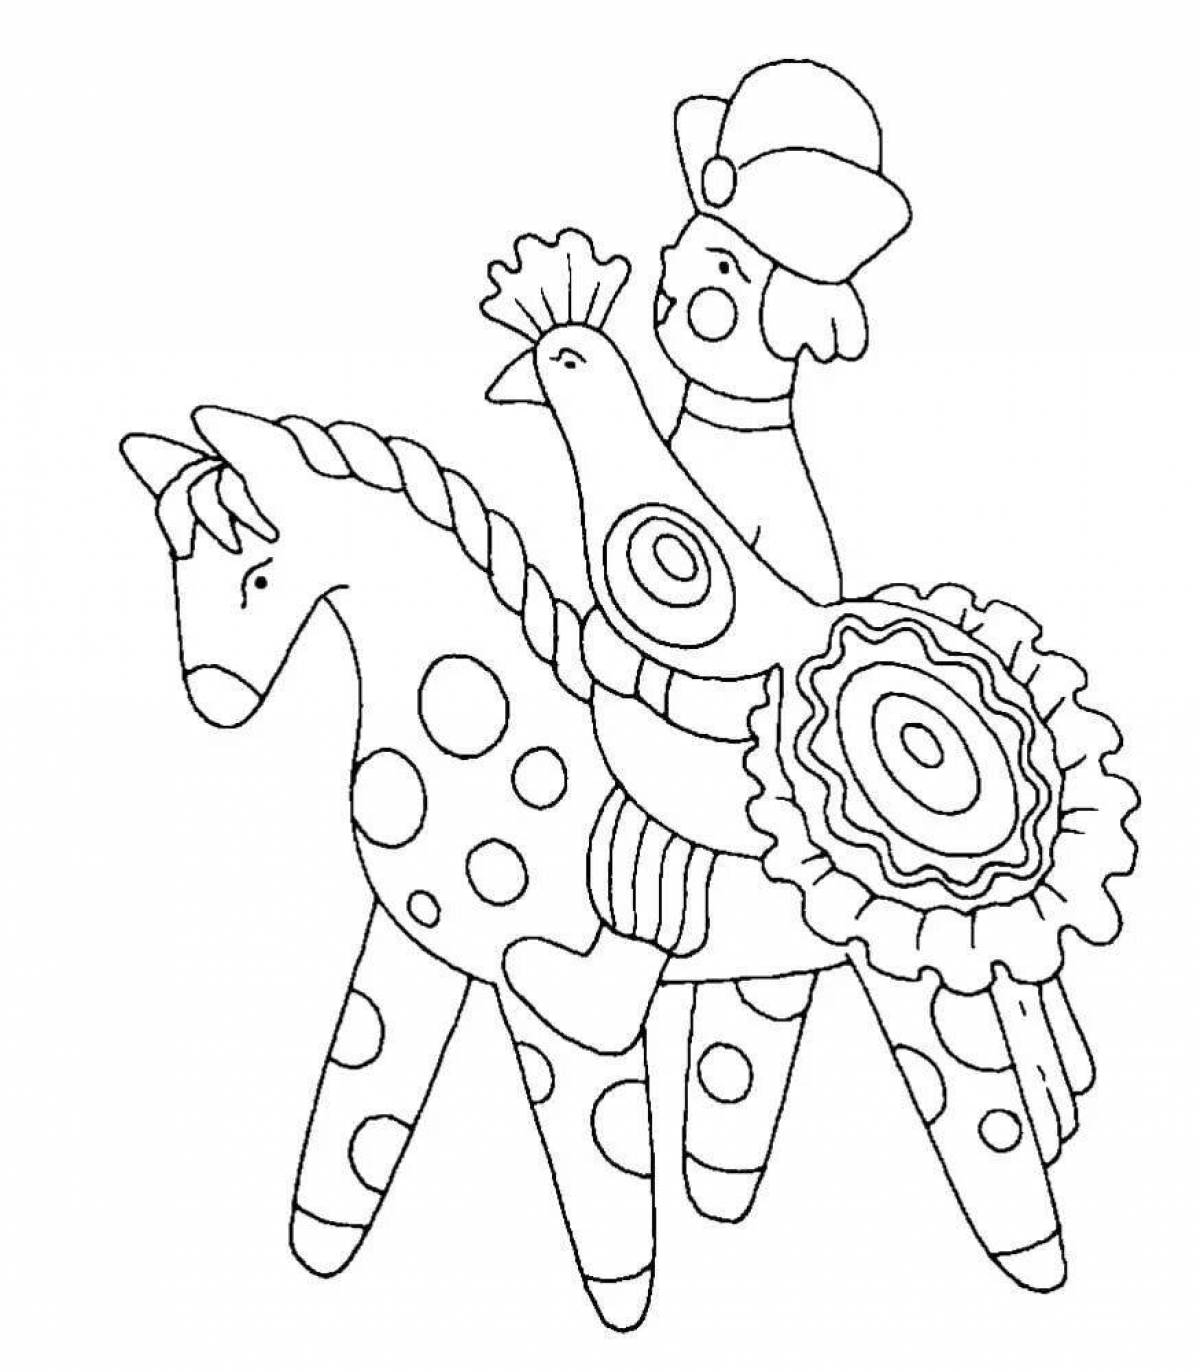 Cute Dymkovo horse coloring pages for kids